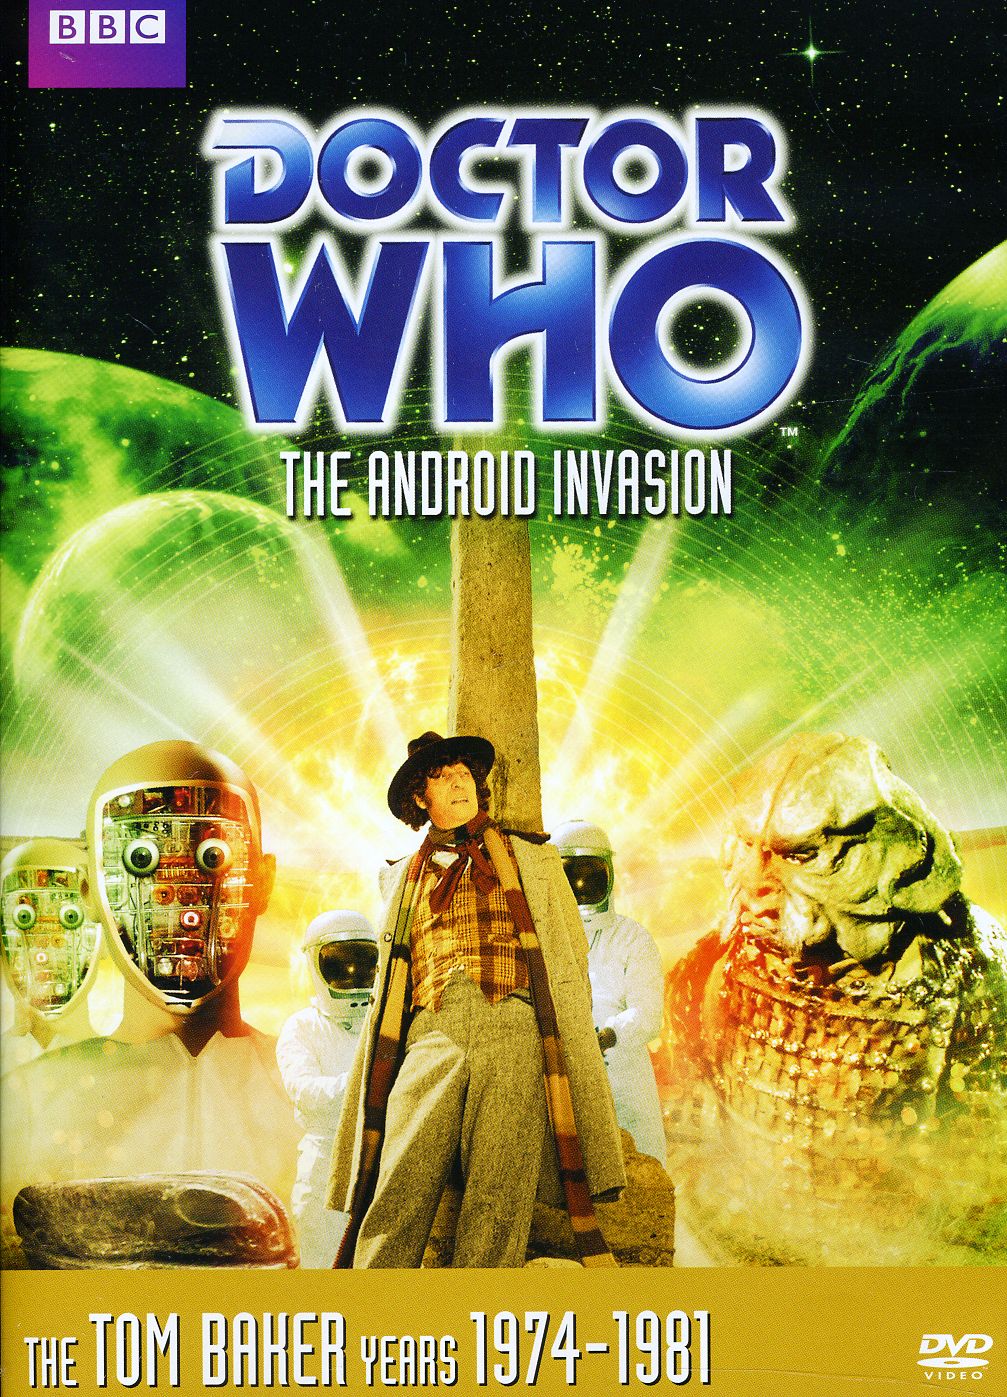 DOCTOR WHO: THE ANDROID INVASION / (ECOA)